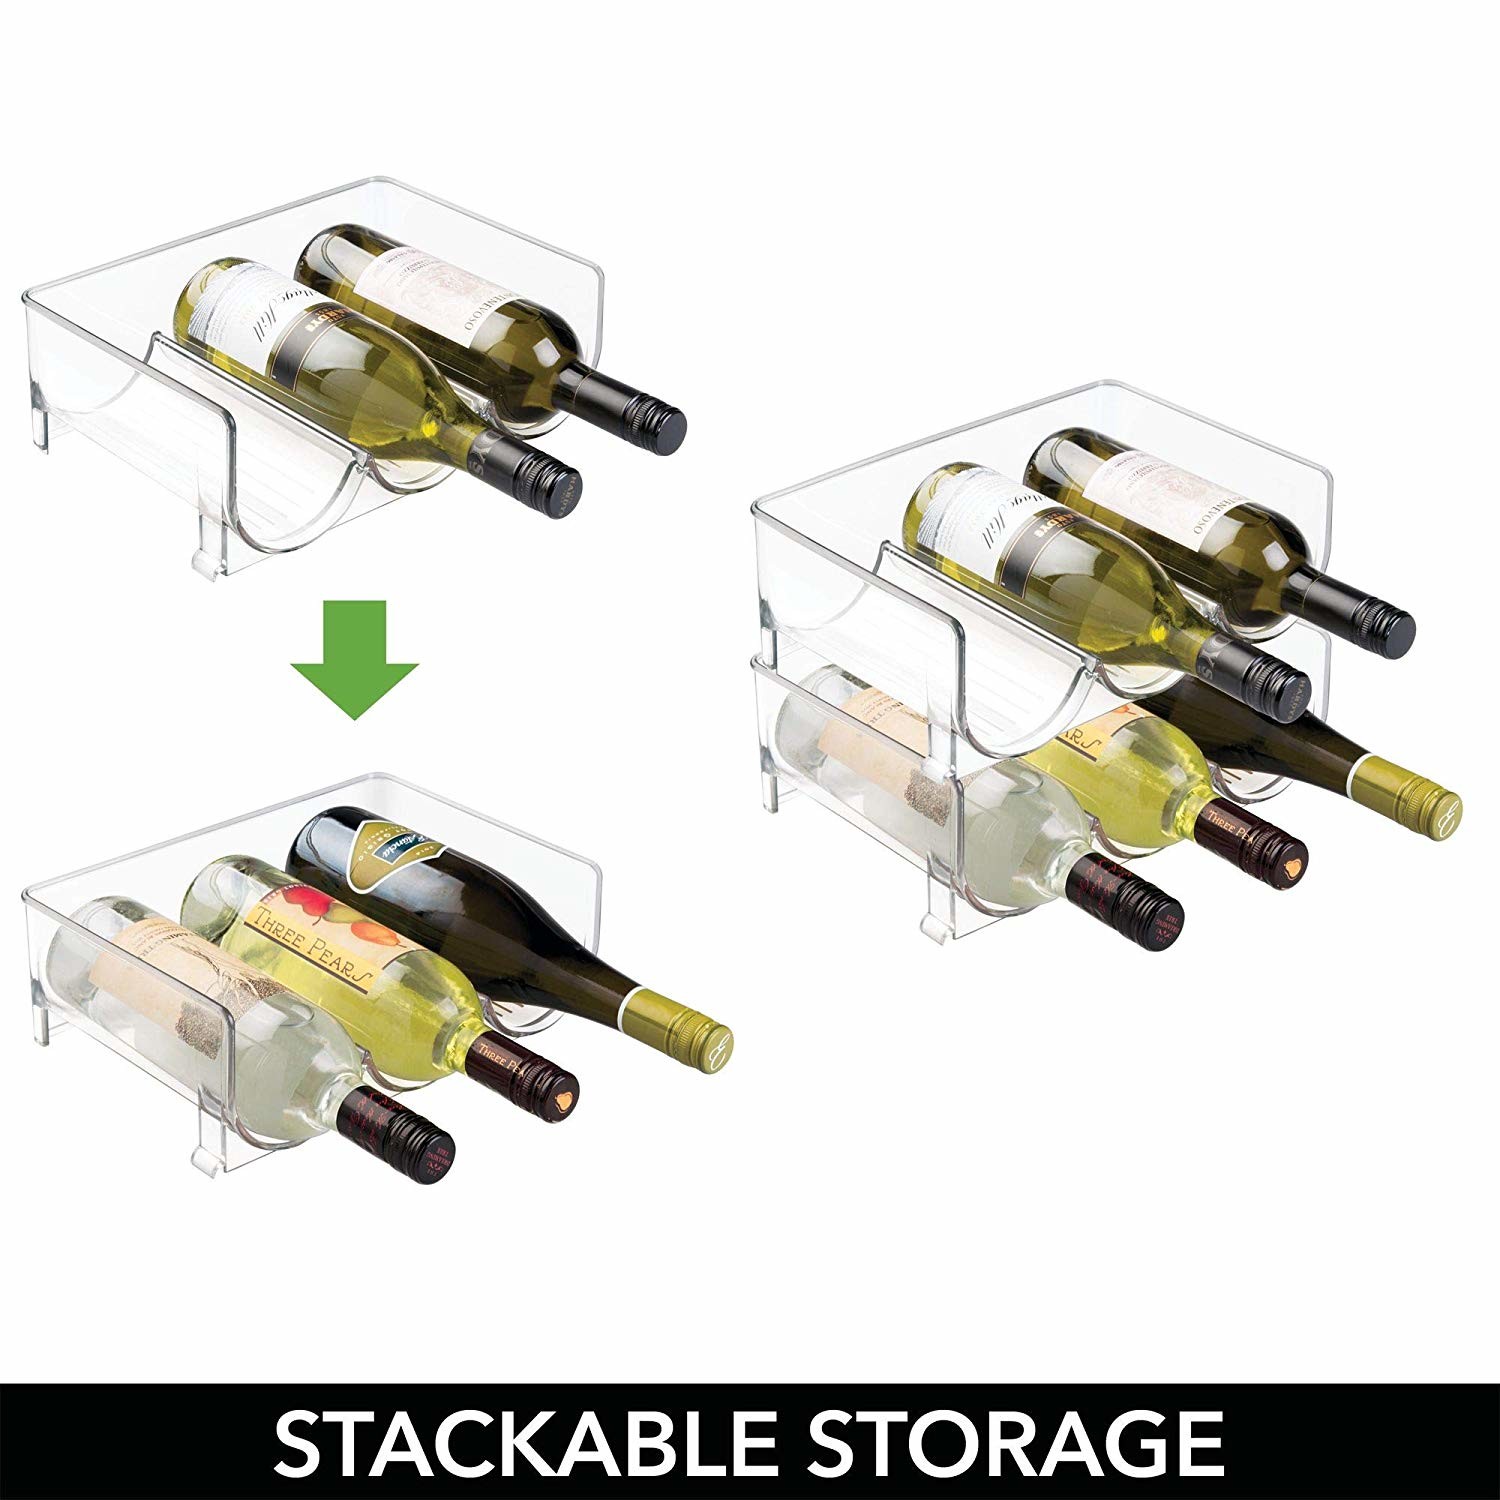 Best Contemporary Stackable Acrylic Wine Bottle Holder For Kitchen Countertops wholesale